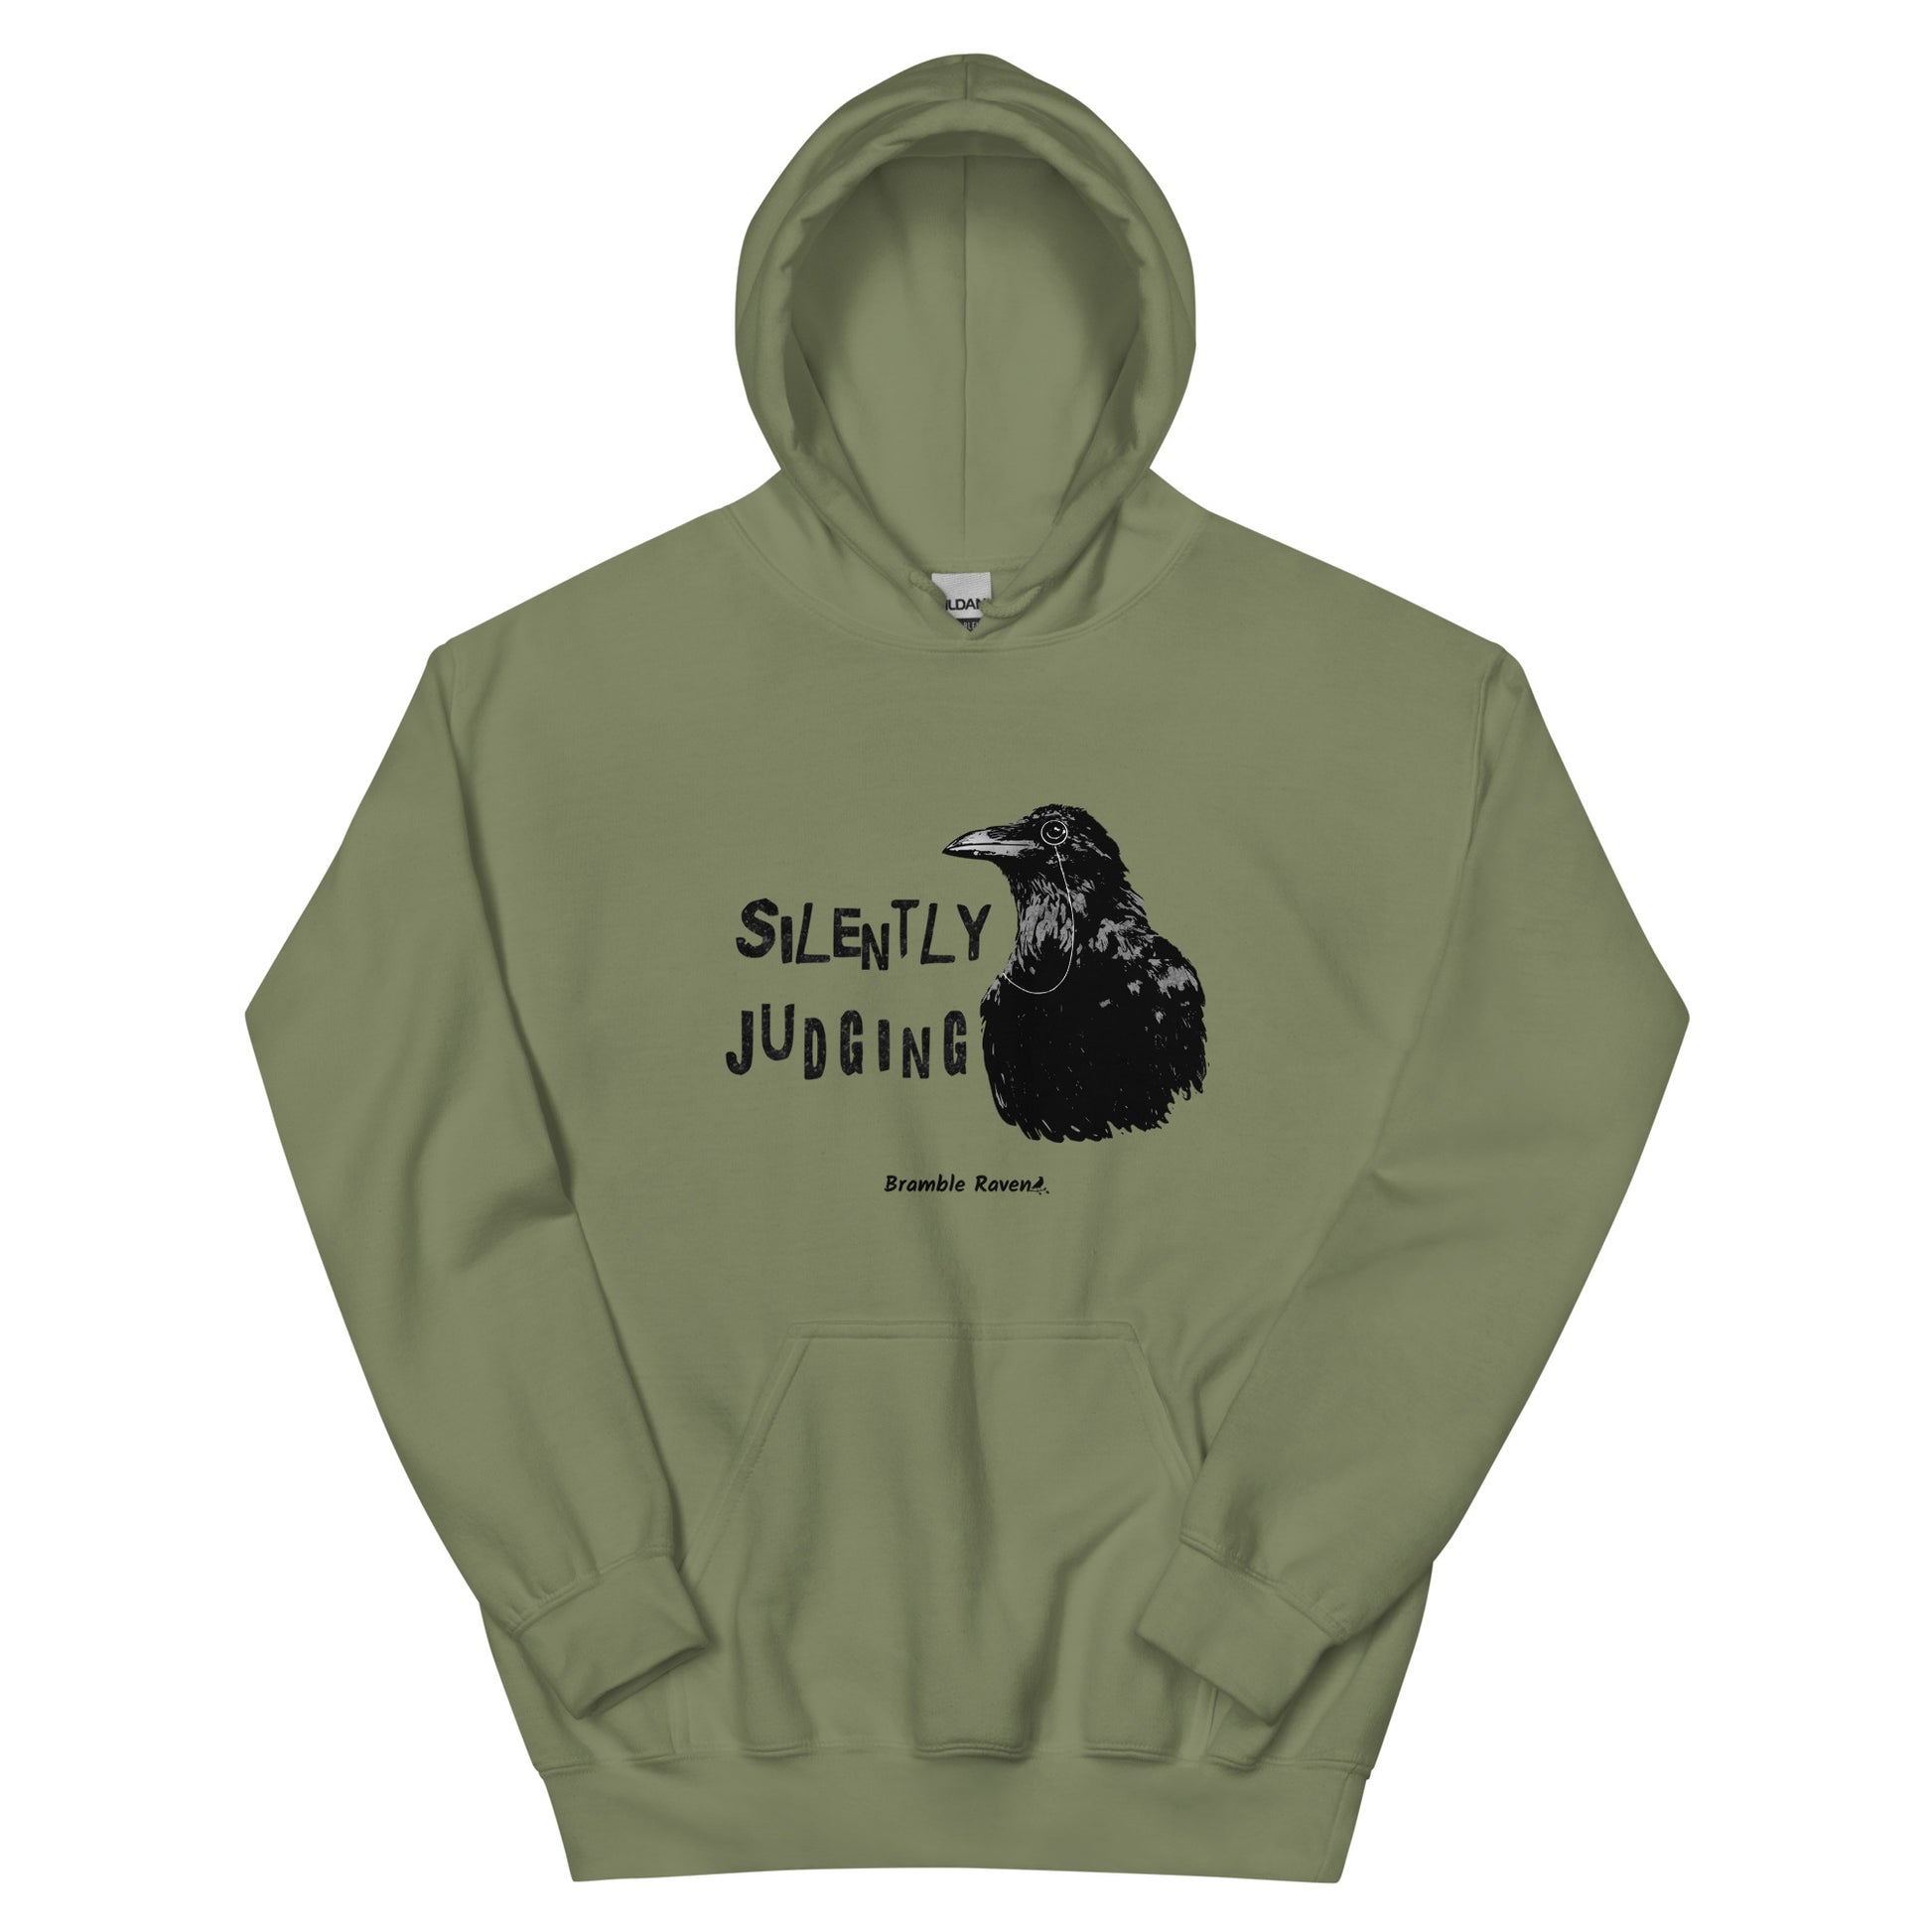 Unisex military green colored hoodie with horizontal design of silently judging text by black crow wearing a monocle.  Design on the front of hoodie. Features double-lined hood and front pouch pocket.